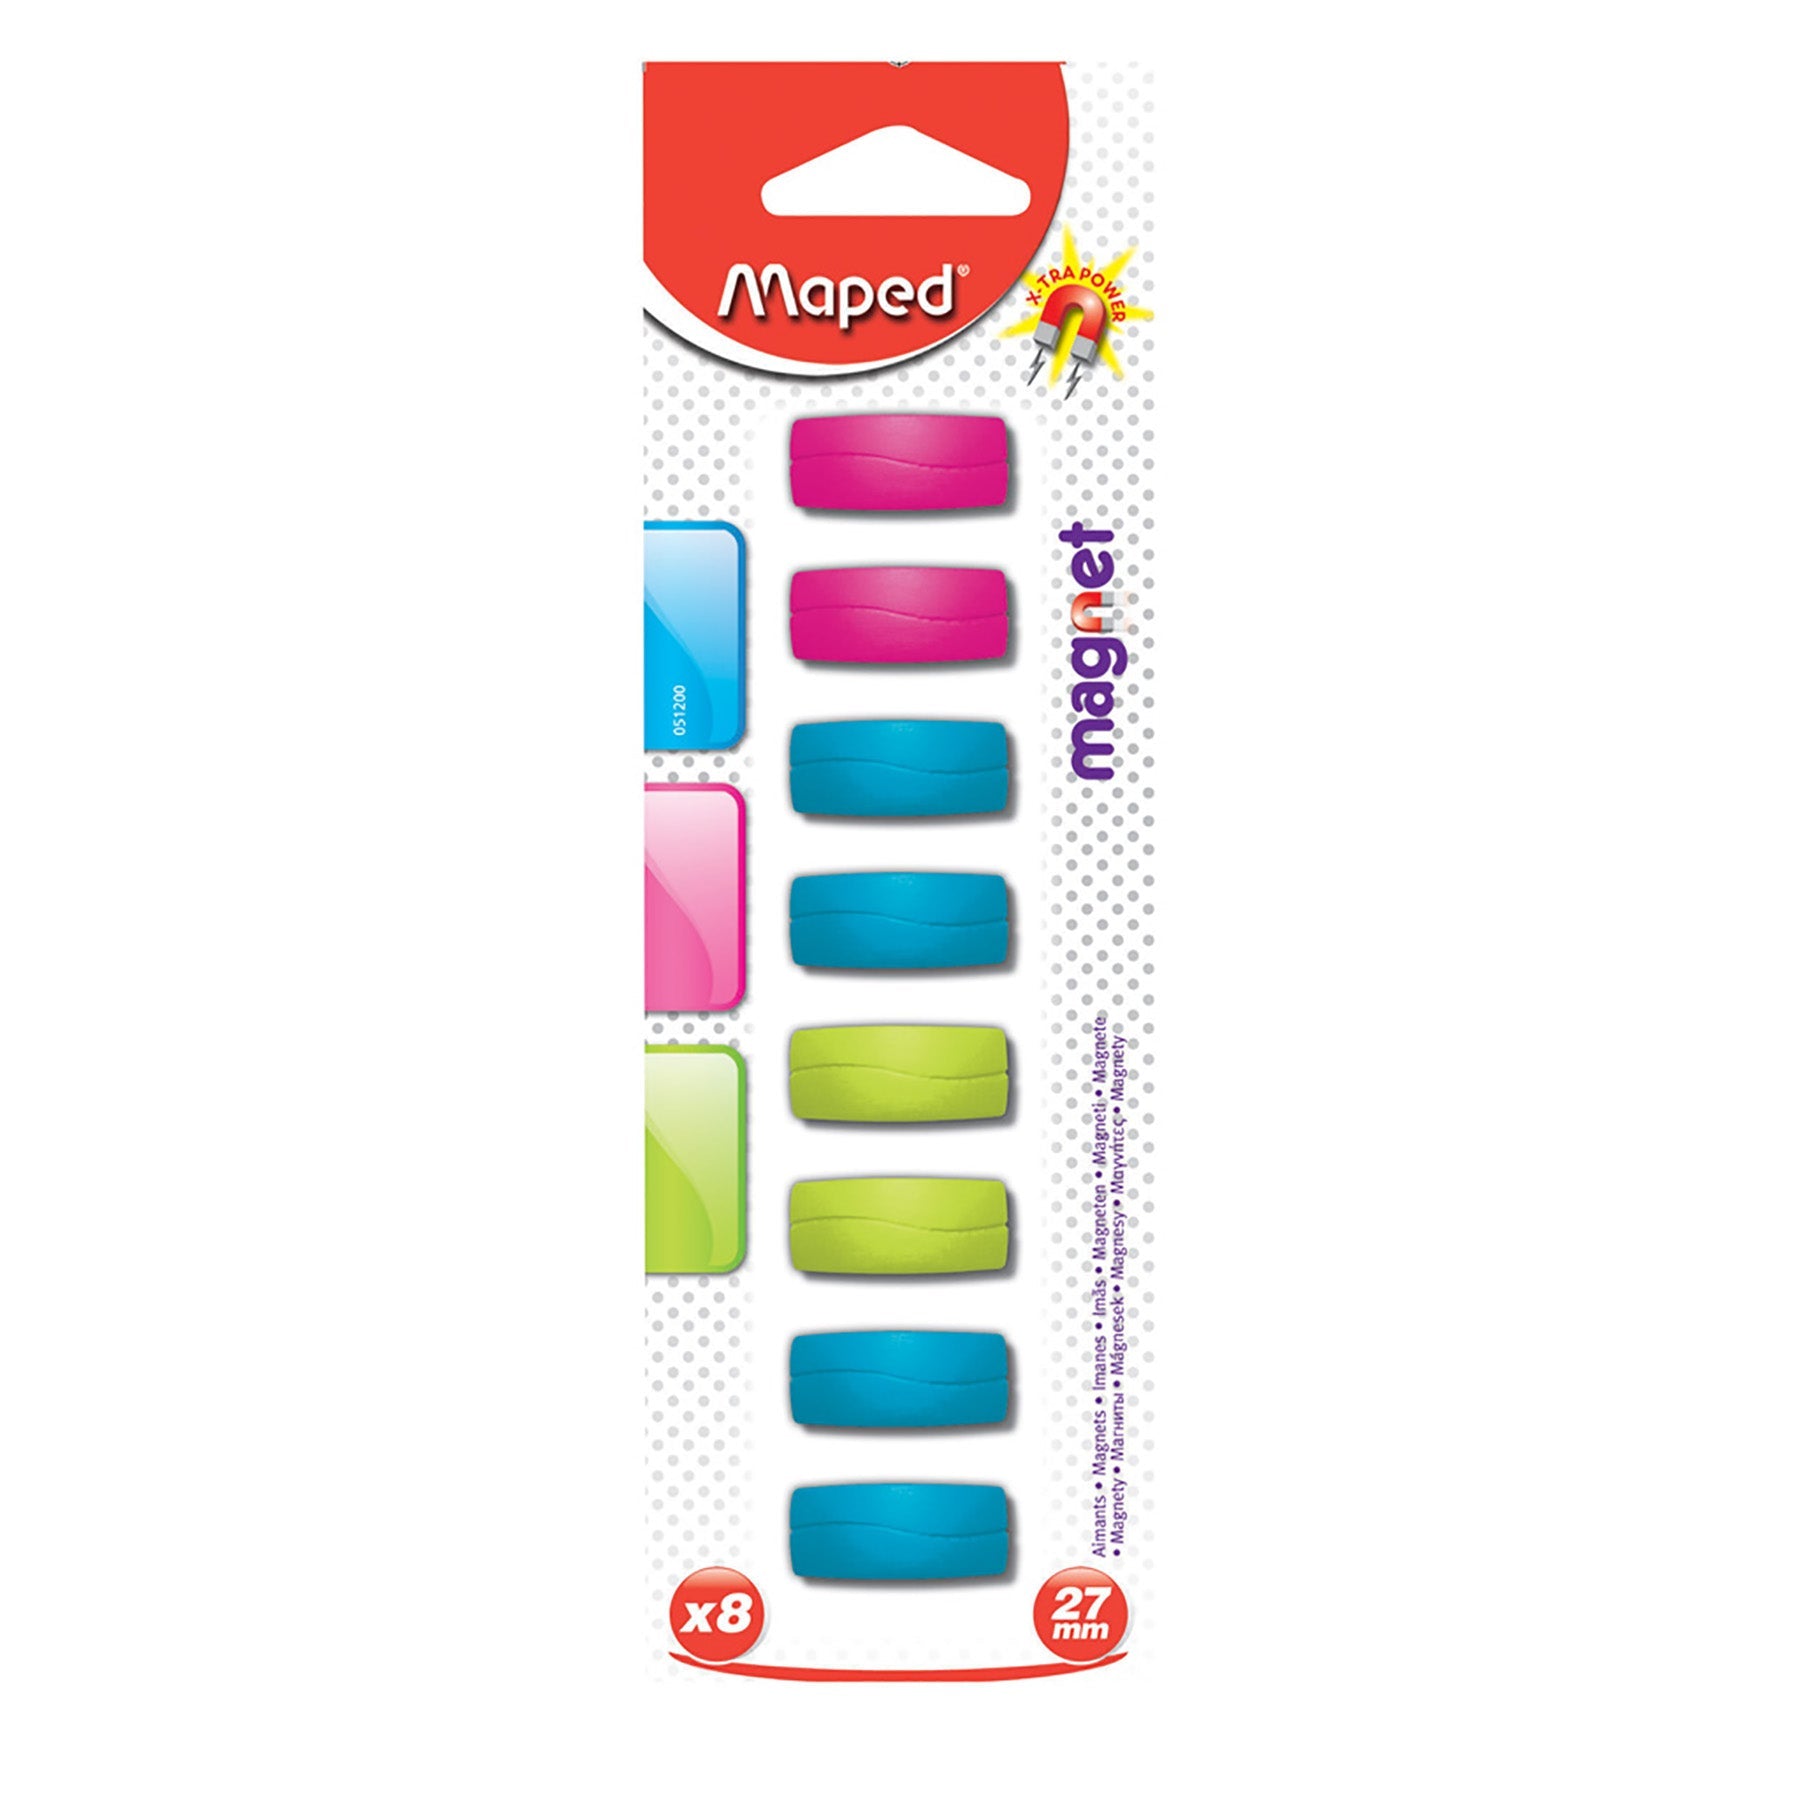 Maped 8 Magnets Rectangular Plastic 1in